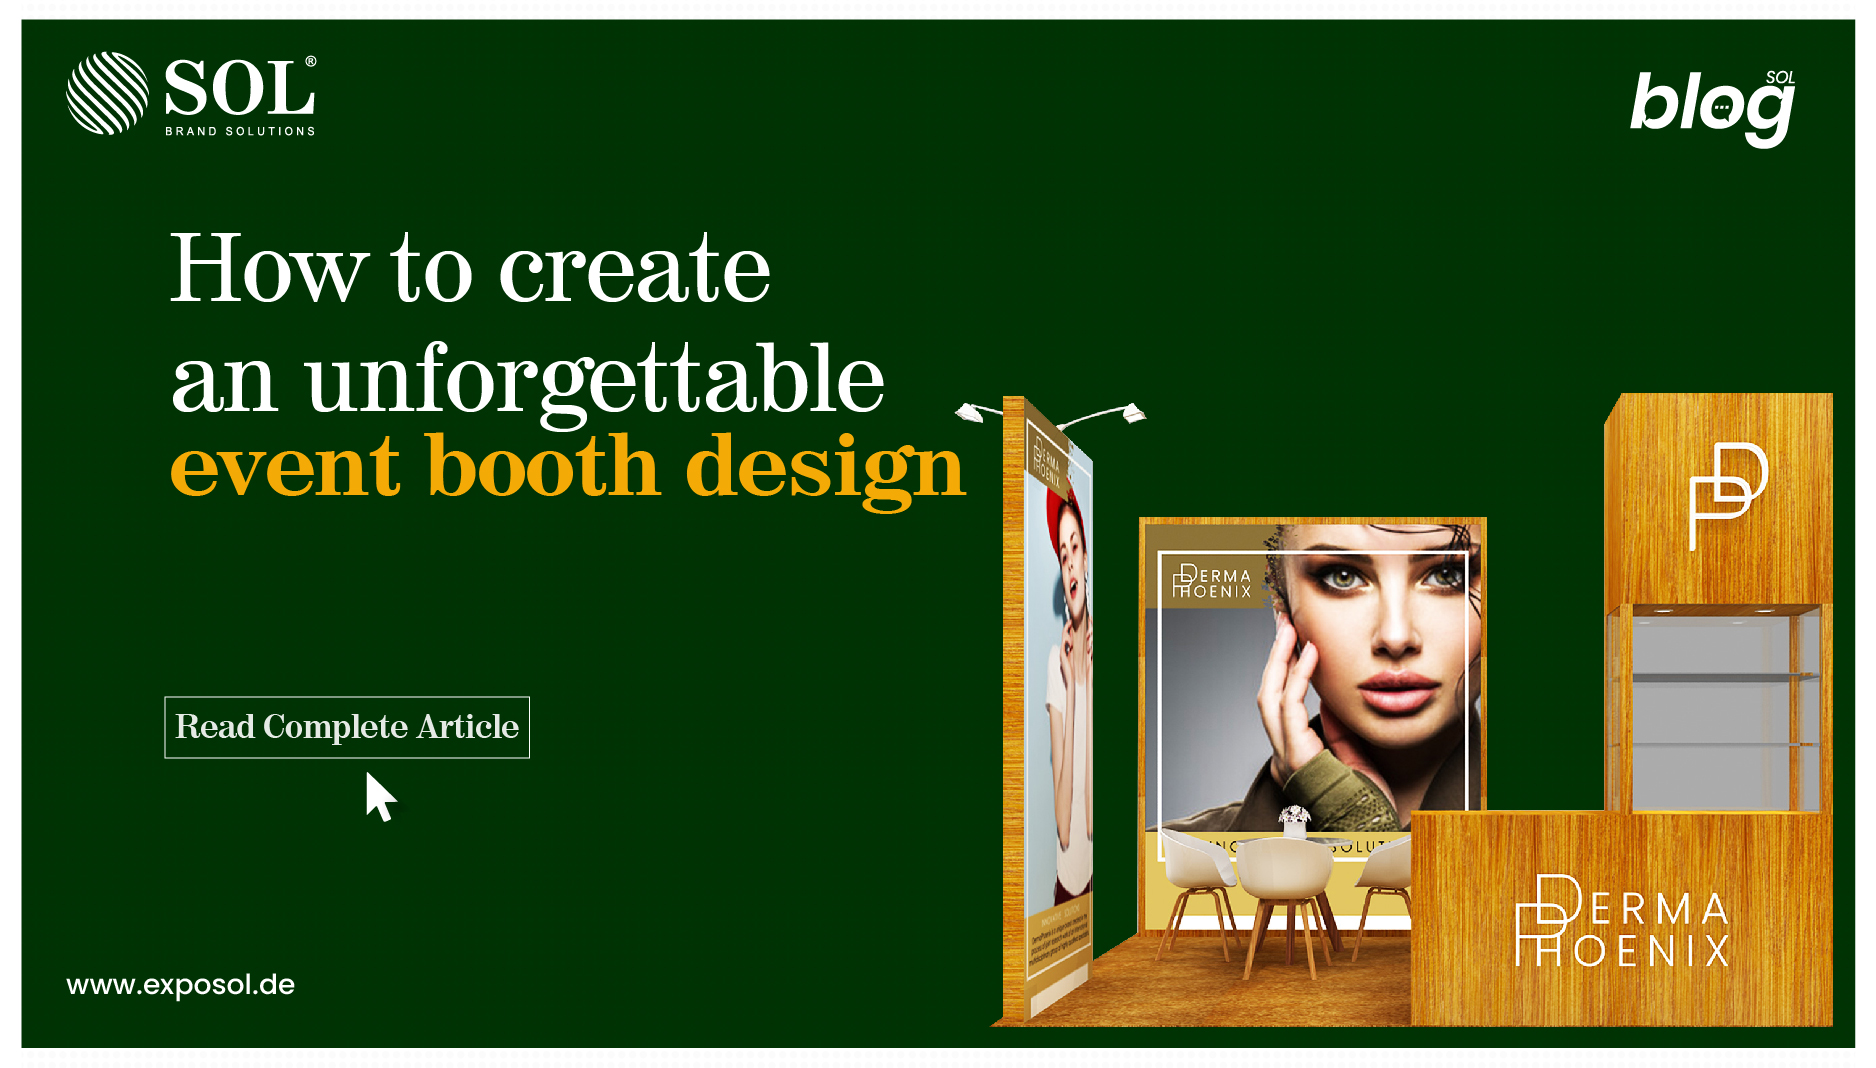 HOW TO CREATE AN UNFORGETABLE EVENT BOOTH DESIGN?